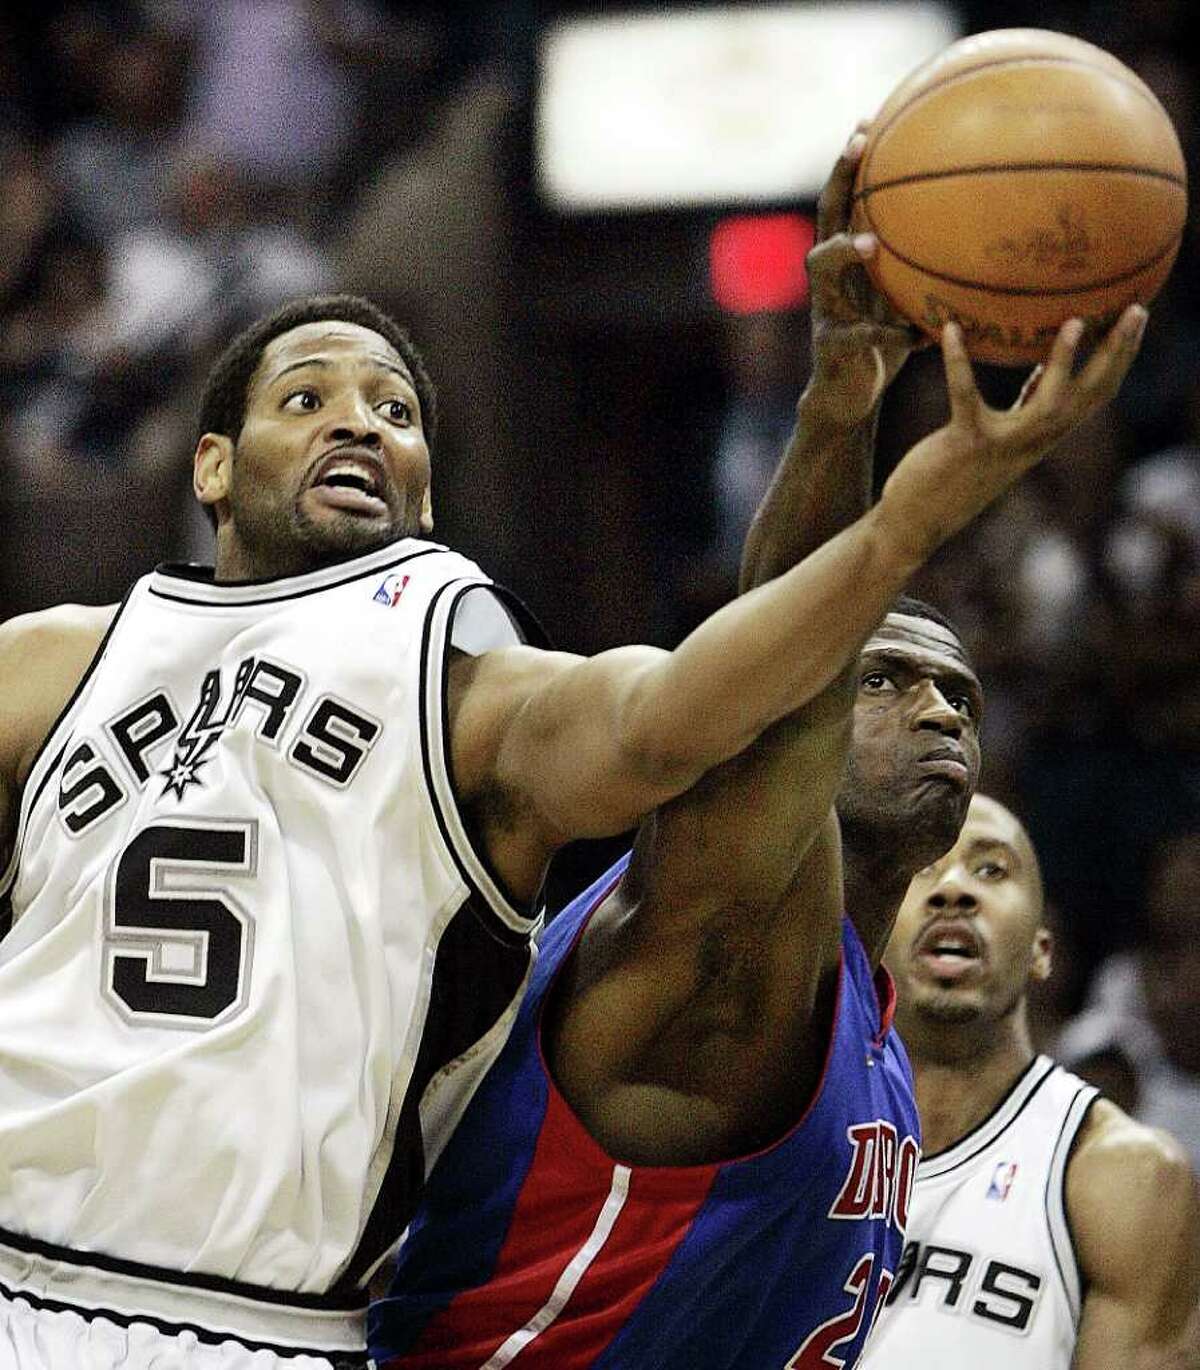 San Antonio Spurs' Robert Horry (5) and Detroit Pistons' Antonio McDyess battle for the ball during the first quarter in Game 7 of the NBA finals in San Antonio, Thursday, June 23, 2005. (AP Photo/Joe Cavaretta)